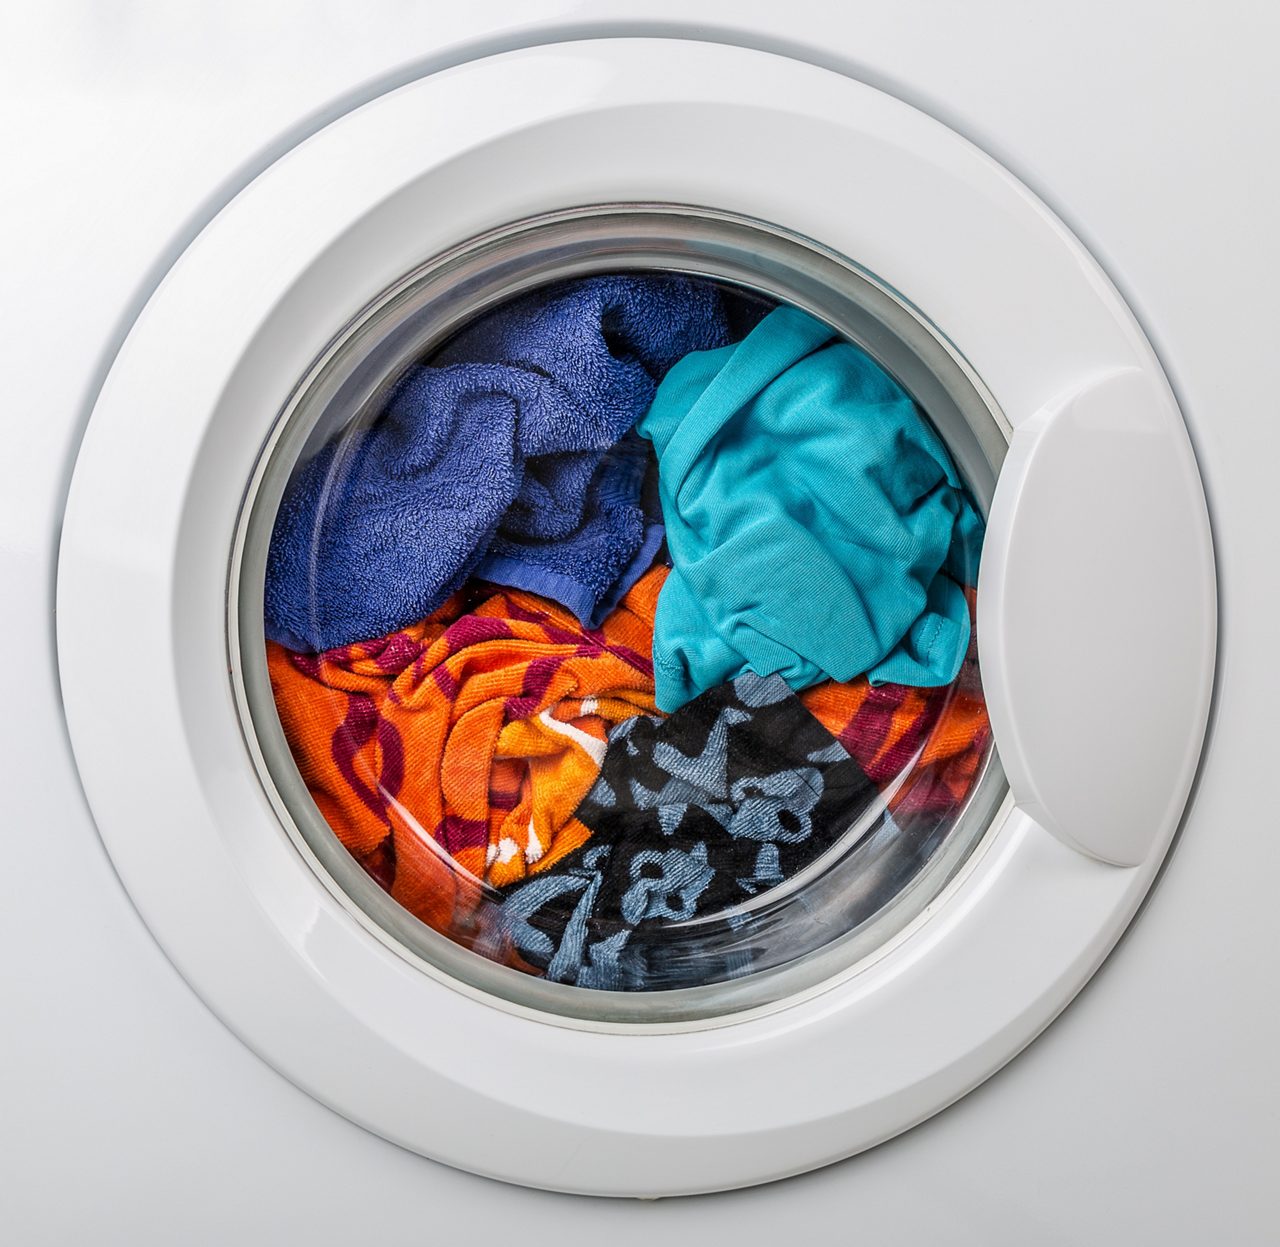 Washing machine with color clothes inside